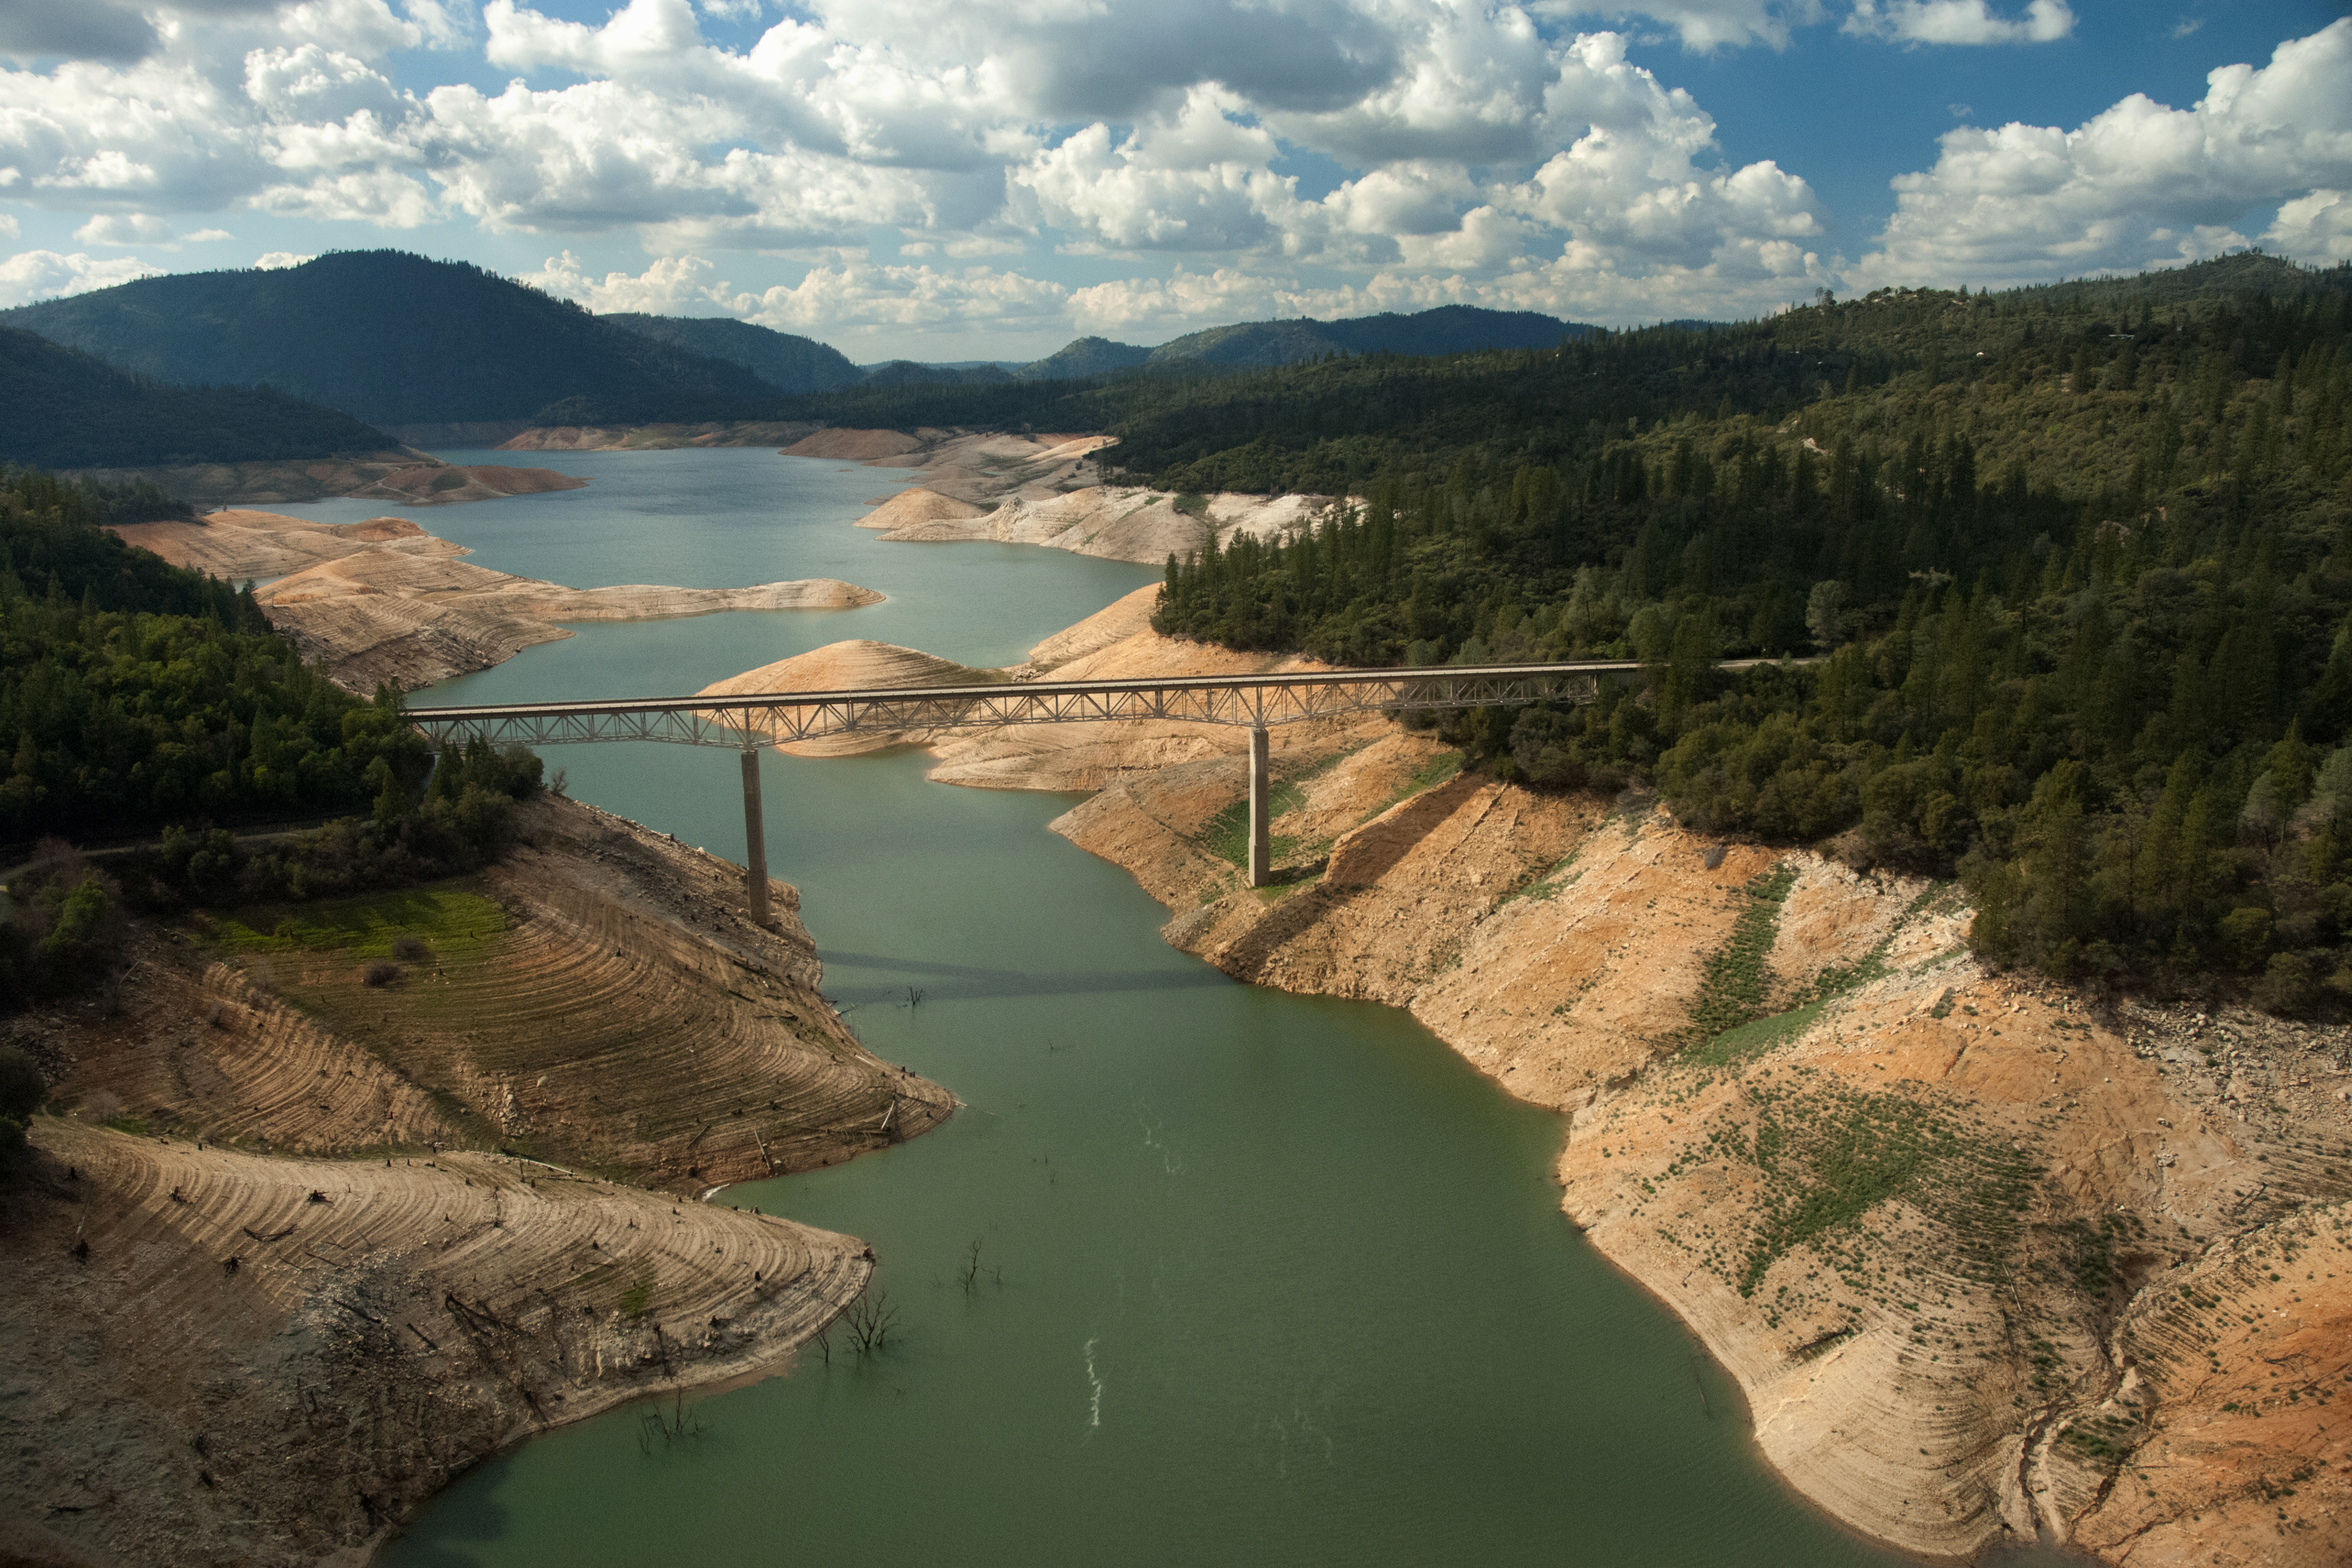 This March 2, 2015 photo of Lake Oroville shows how the drought affected the lake's water level. But the recent surge of rain has risen the lake level significantly. (PAUL HAMES/DEPARTMENT OF WATER RESOURCES